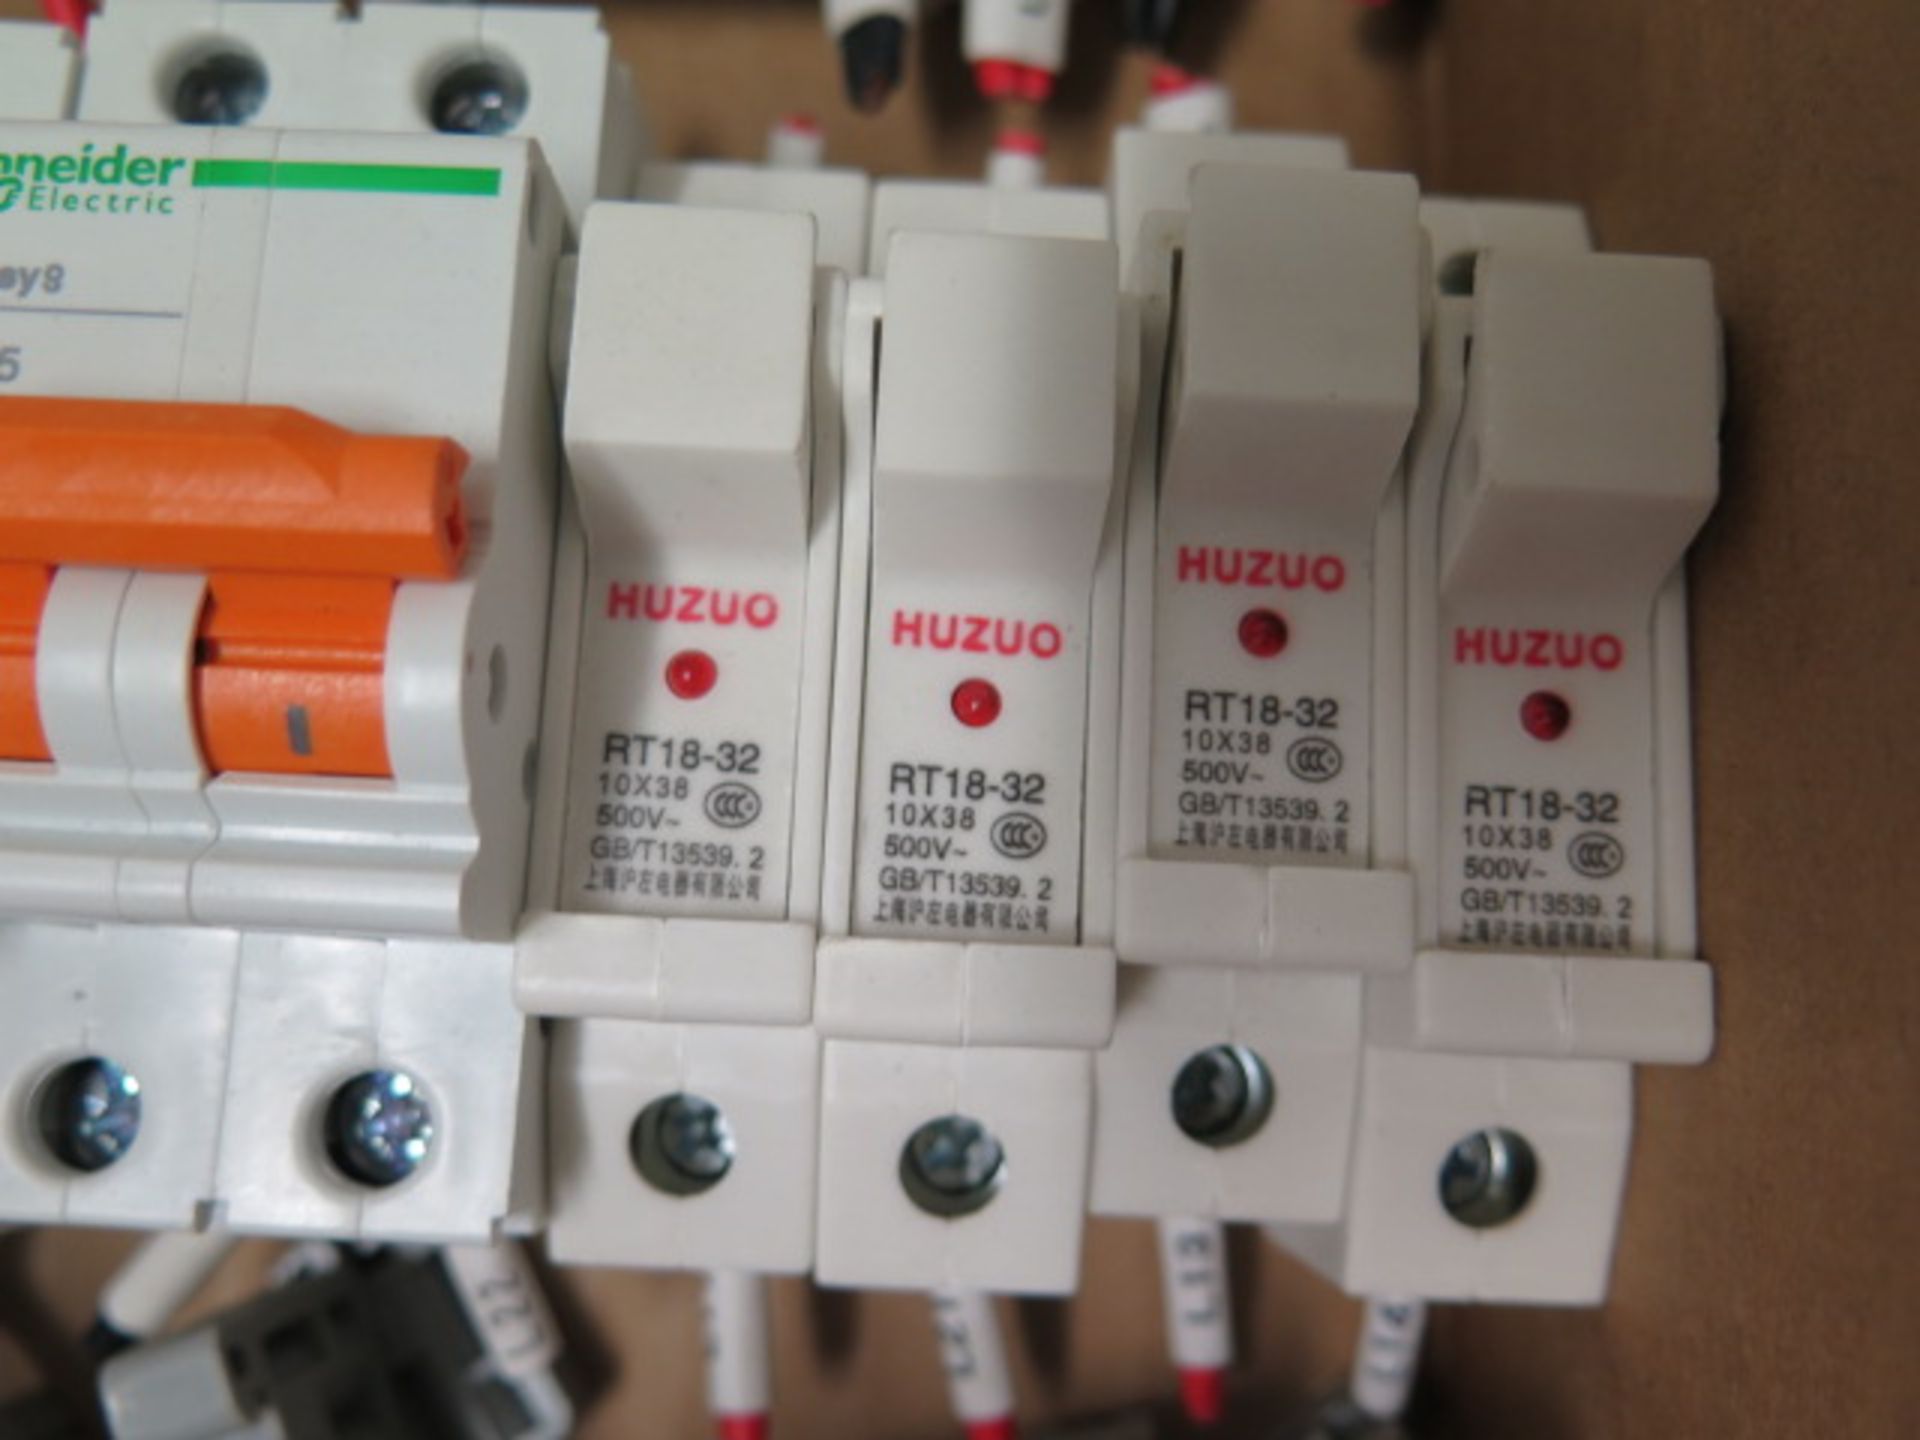 Schneider Easy8 C25 EA9AN2C25 Circuit Breakers (12) and Huzuo RT18-32 10X38 500V G3/T13539.2 Fuse Bl - Image 7 of 7